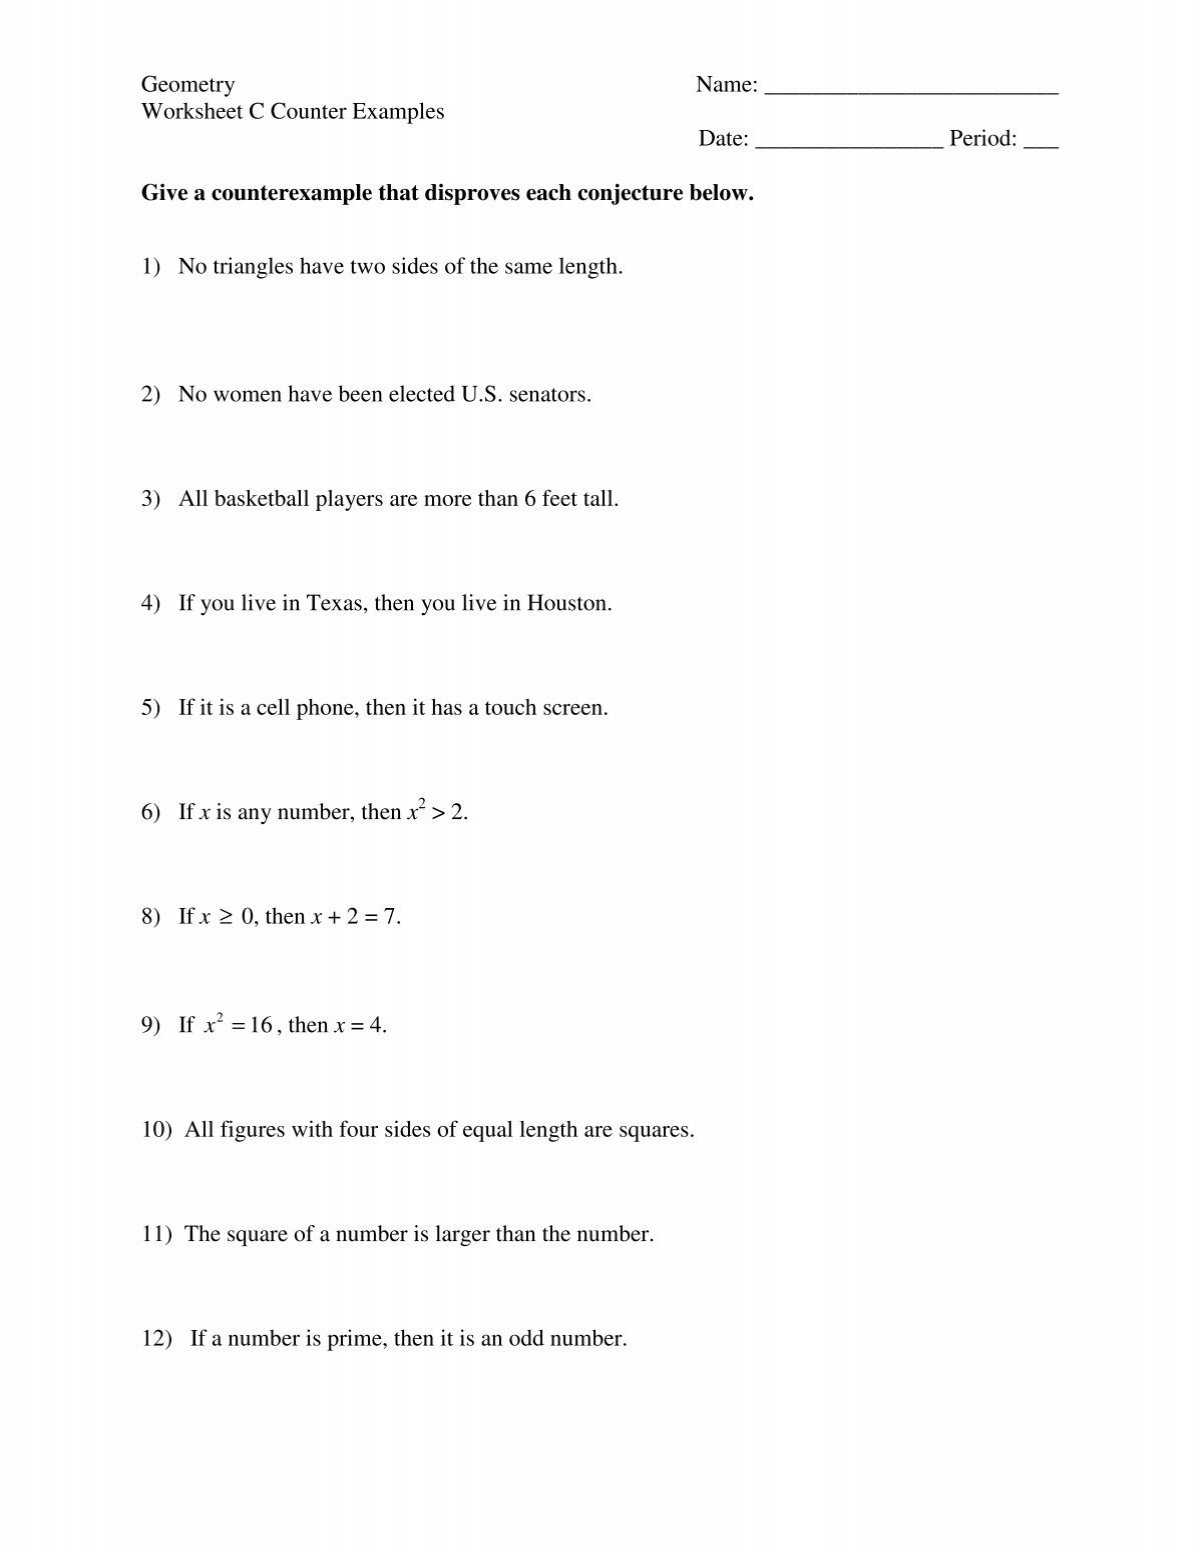 worksheet-c-counter-examples-date-period